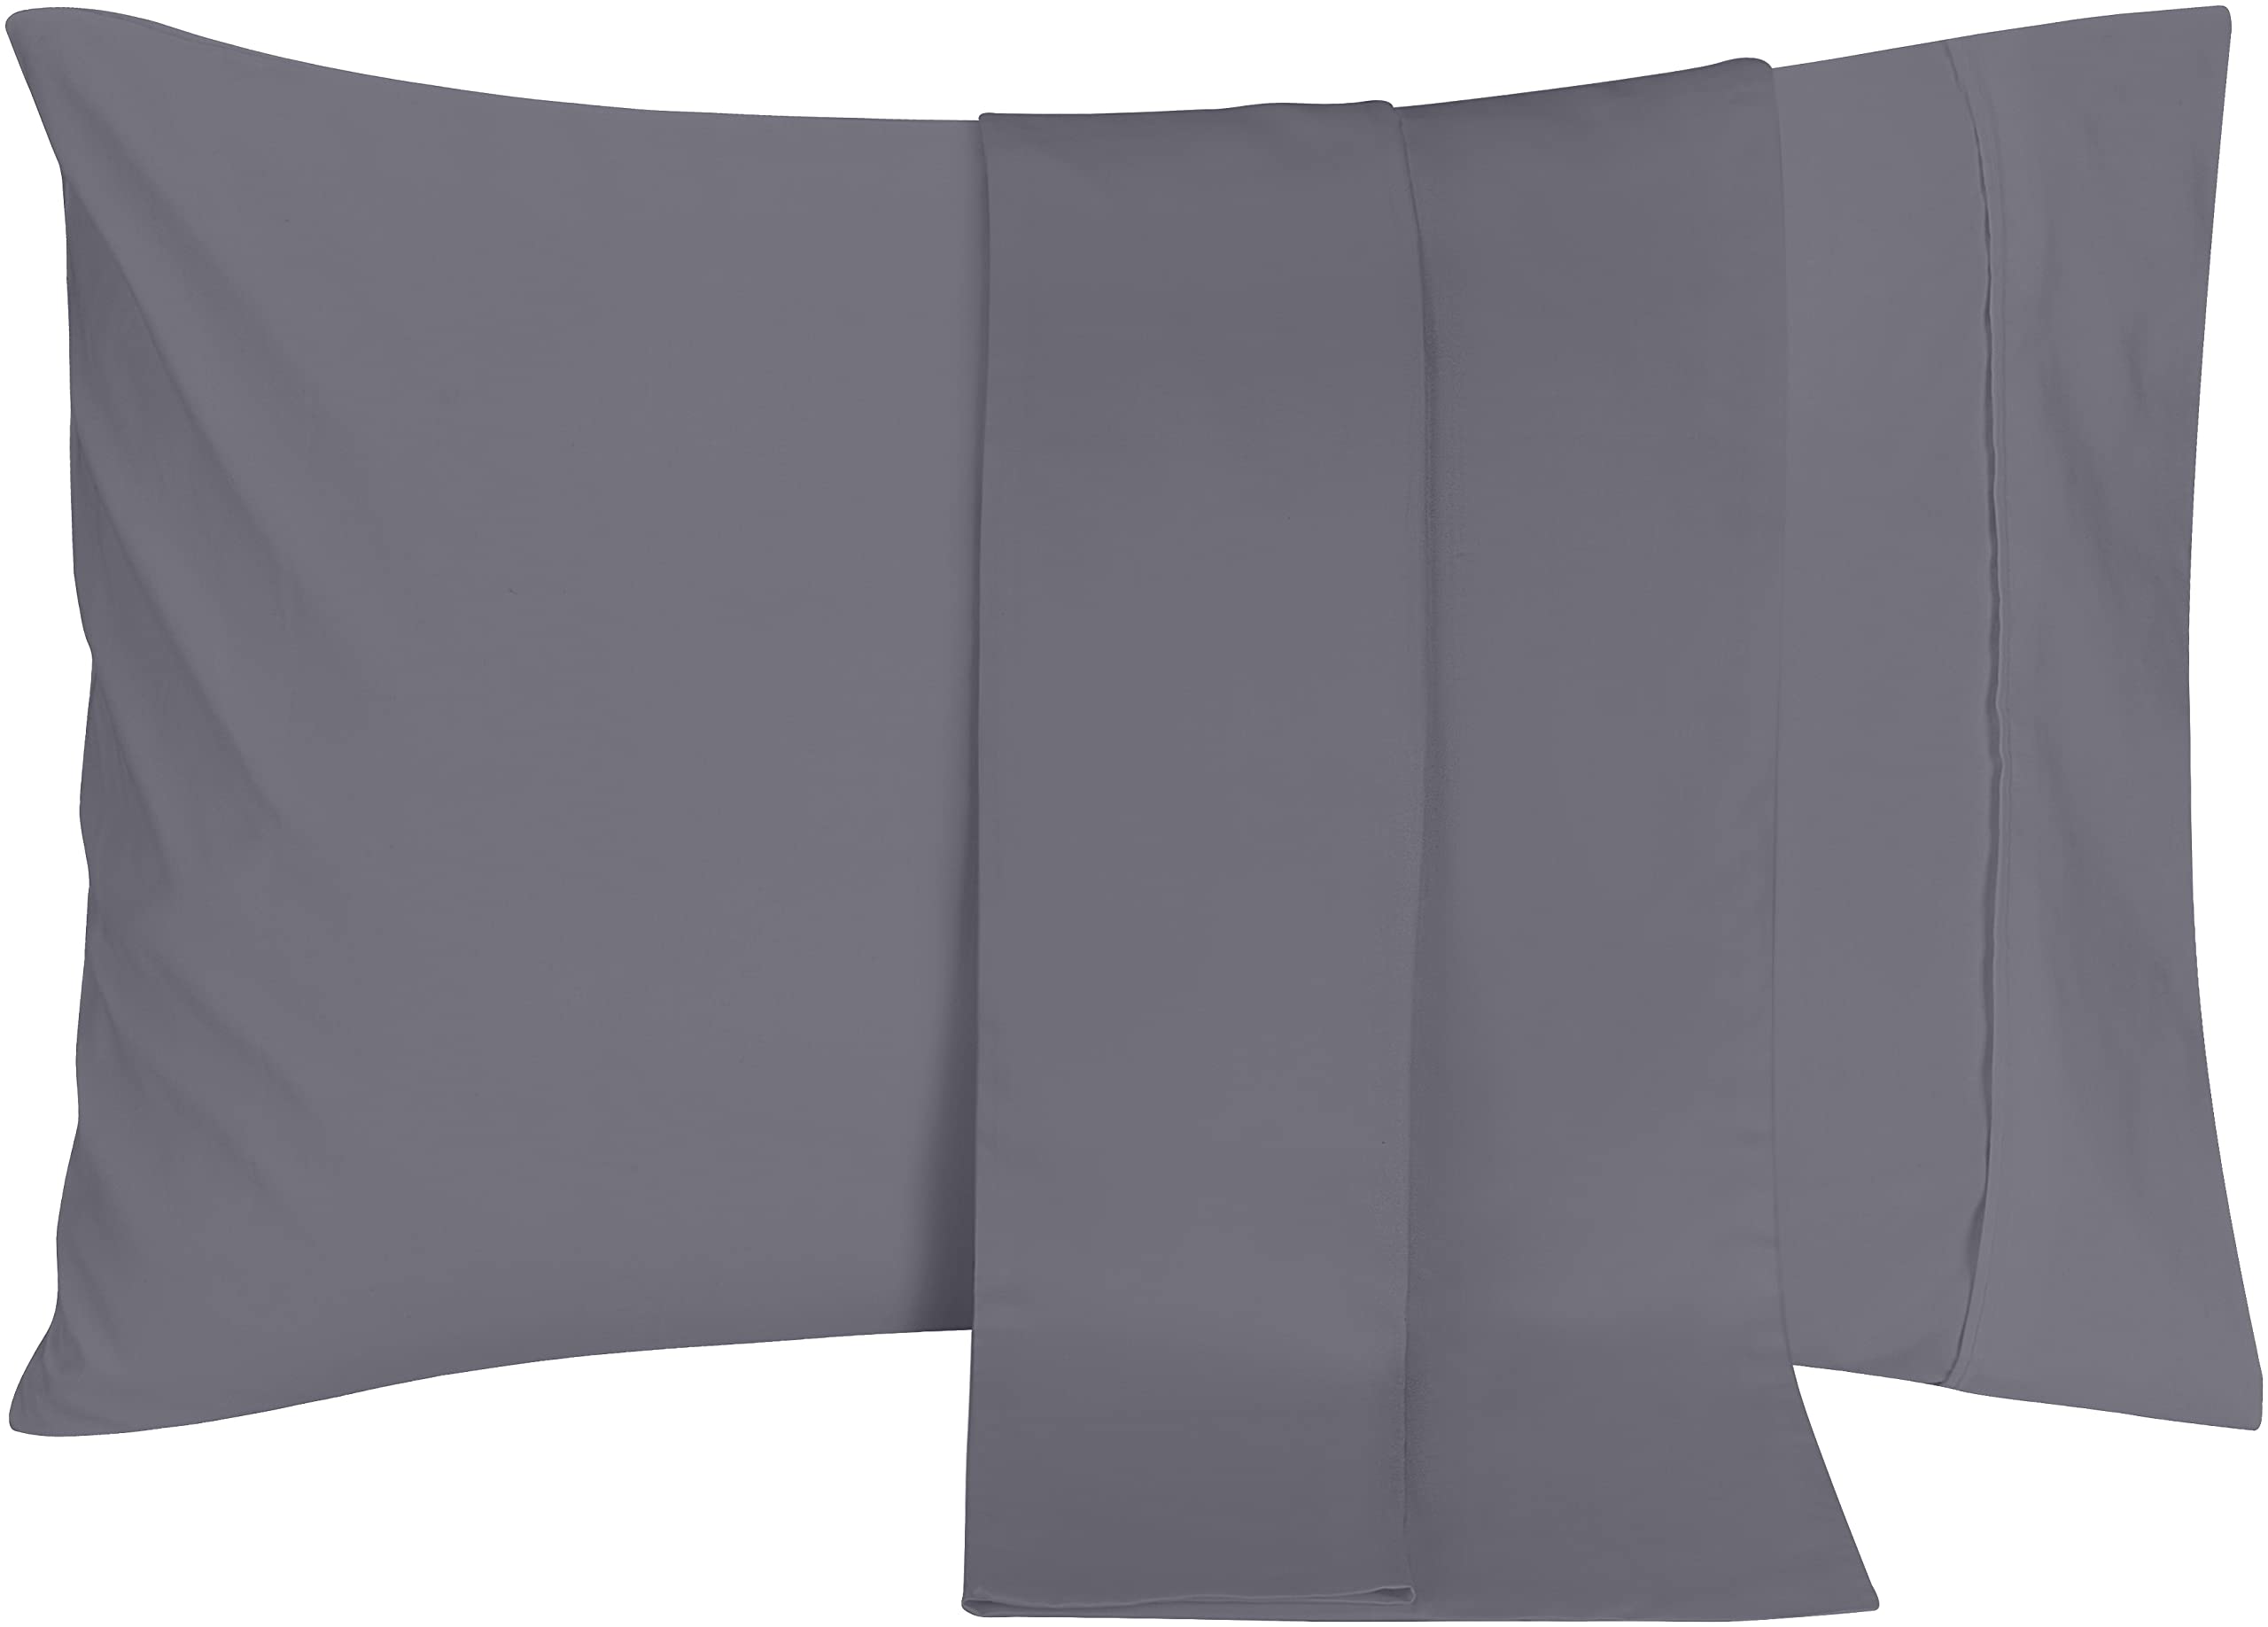 Book Cover Utopia Bedding King Pillowcases - 2 Pack - Envelope Closure - Soft Brushed Microfiber Fabric - Shrinkage and Fade Resistant Pillow Covers 20 X 40 Inches (King, Grey) King Grey